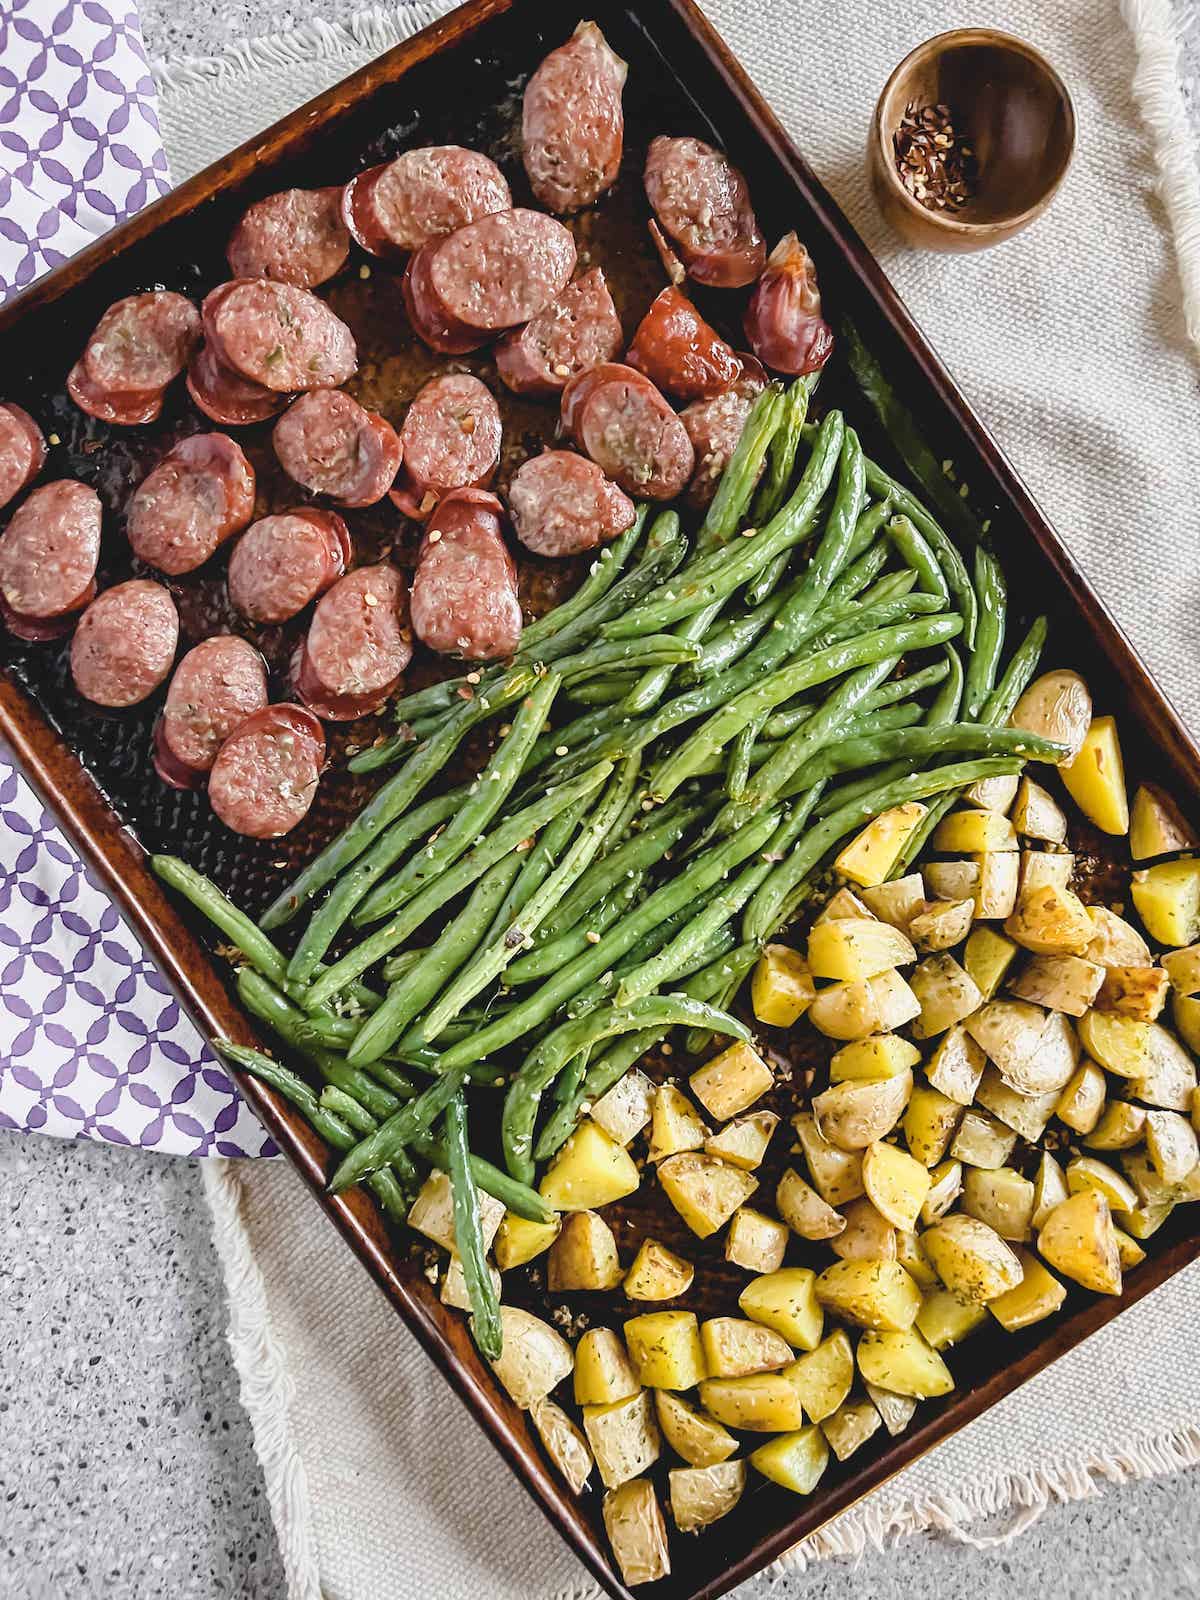 Copper sheet pan with sausage, potatoes and green beans.